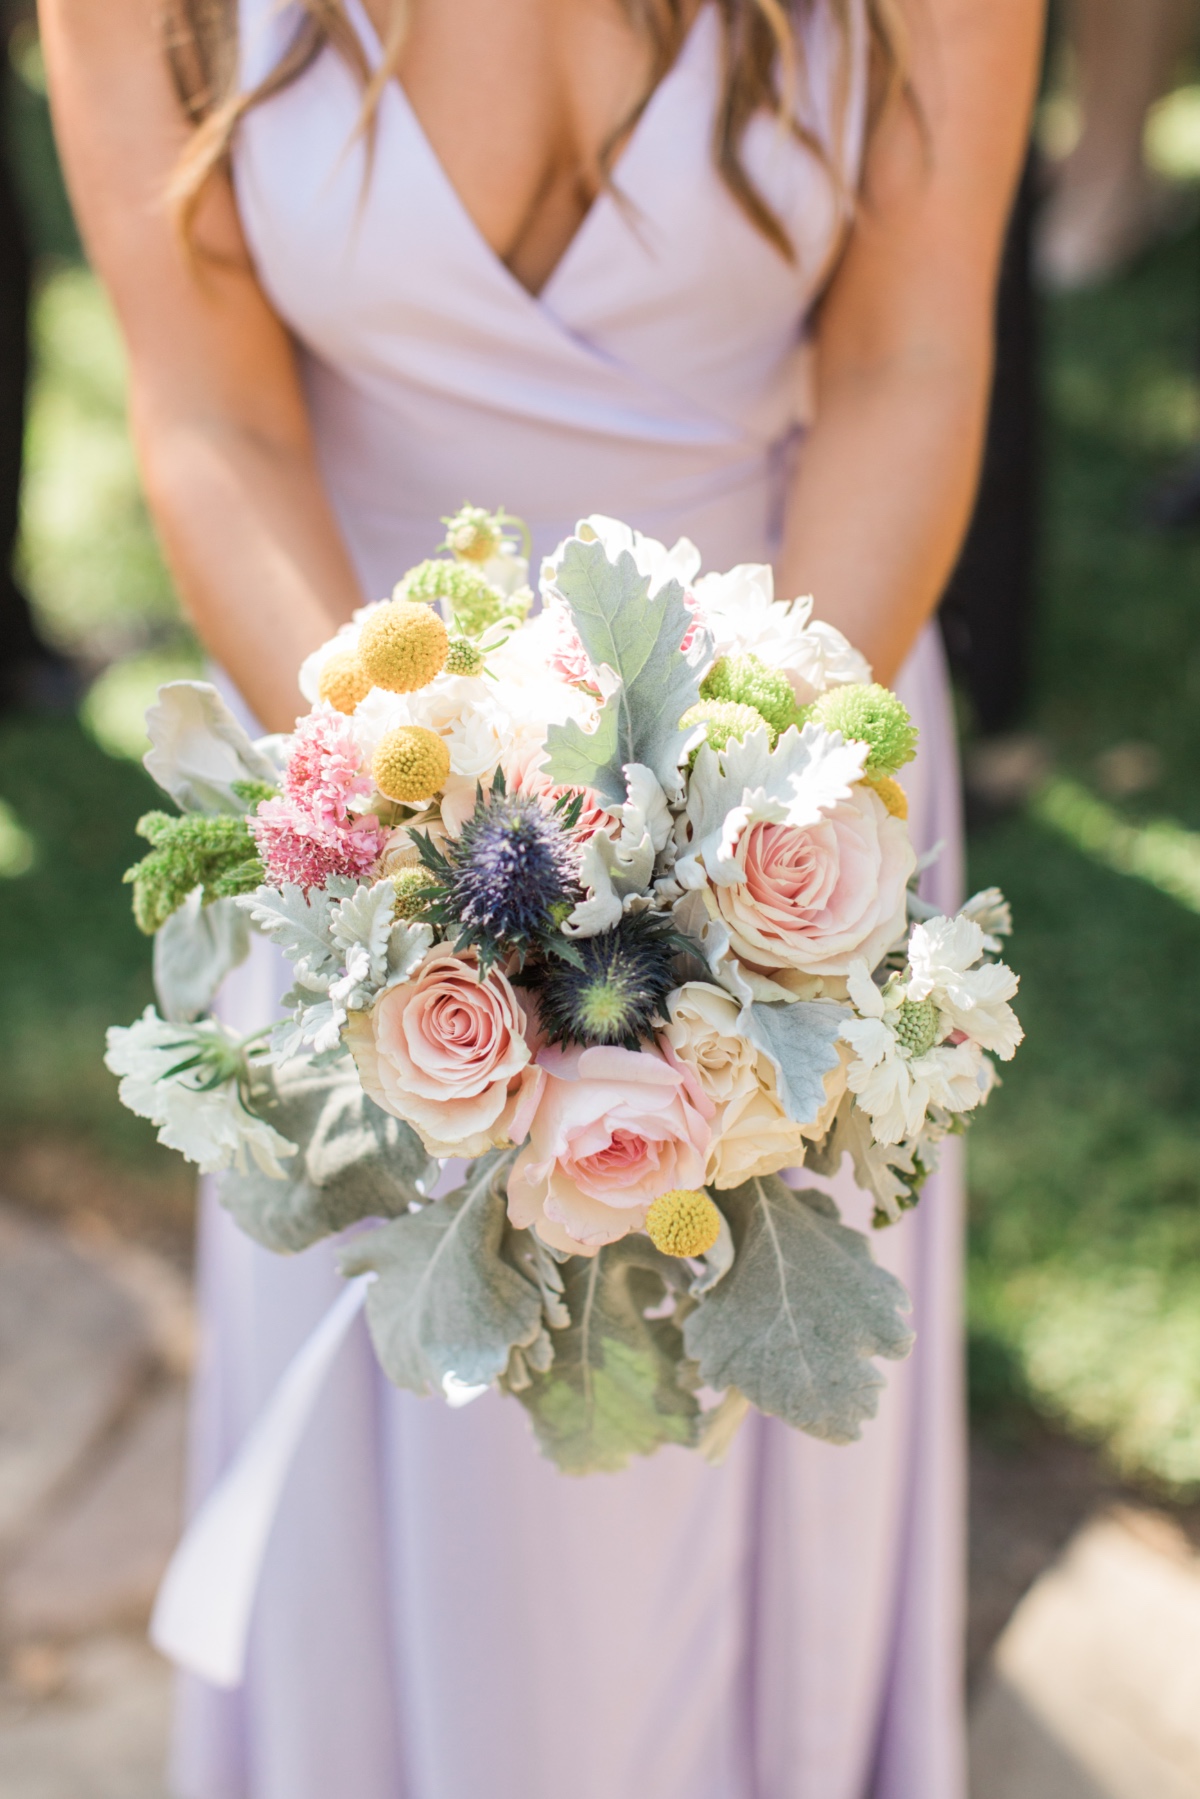 lambs ear, billy button and rose bridesmaid bouquet